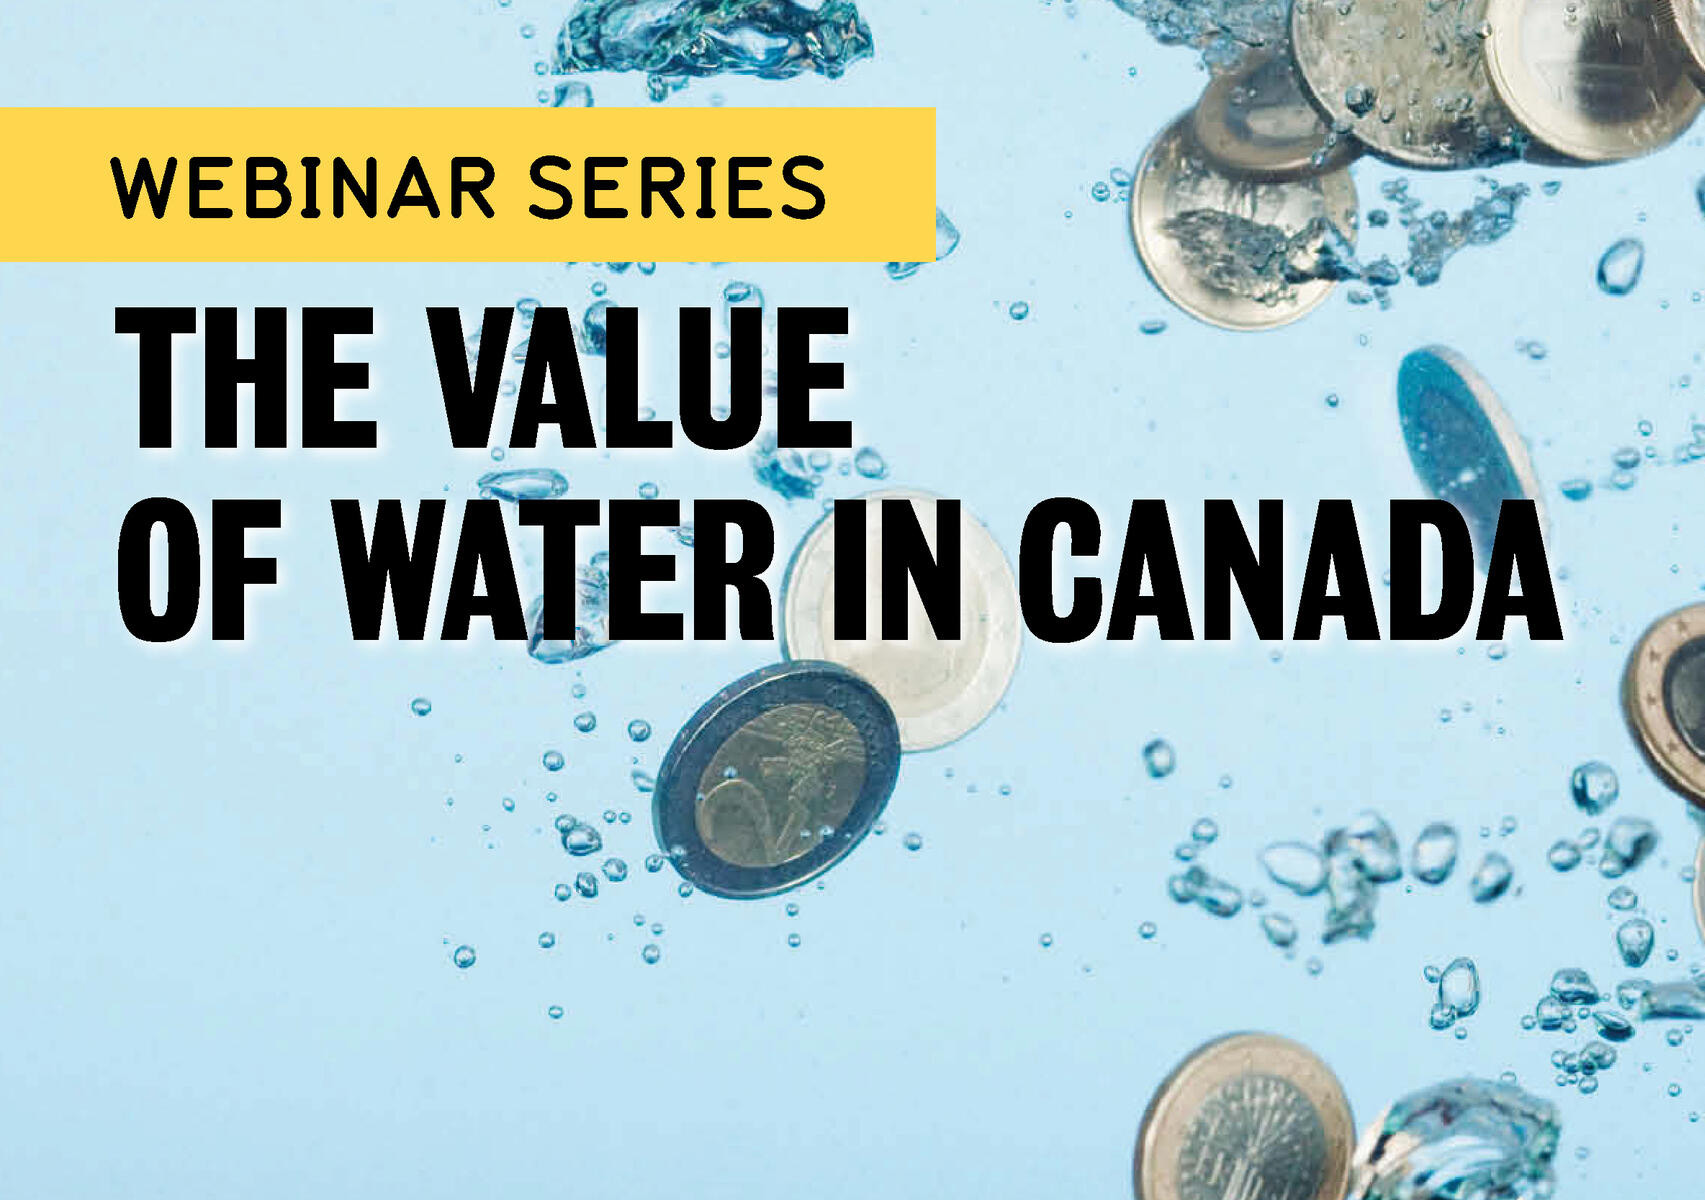 Webinar Series: The Value of Water in Canada